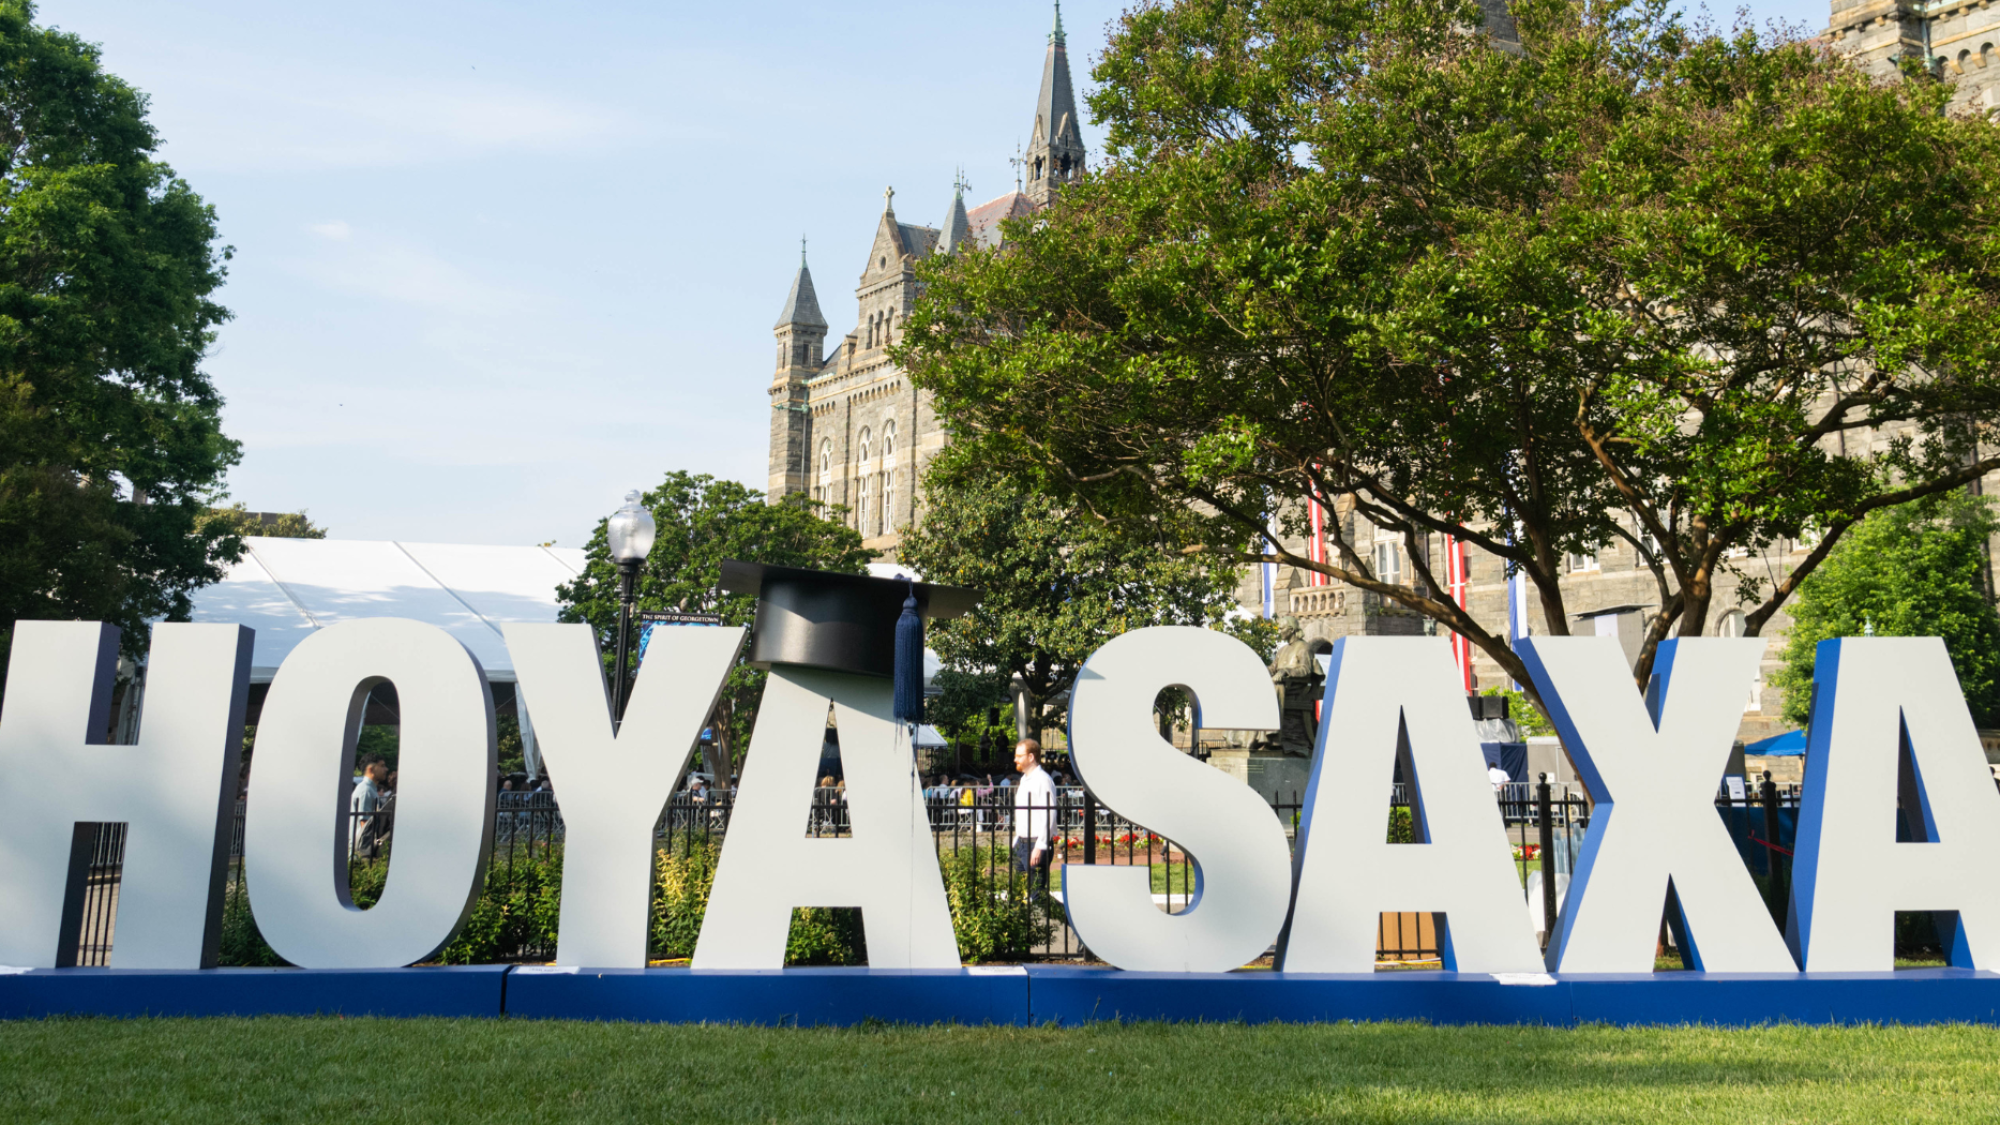 Hoya Saxa sign on in front of Healy Hall at graduation in spring